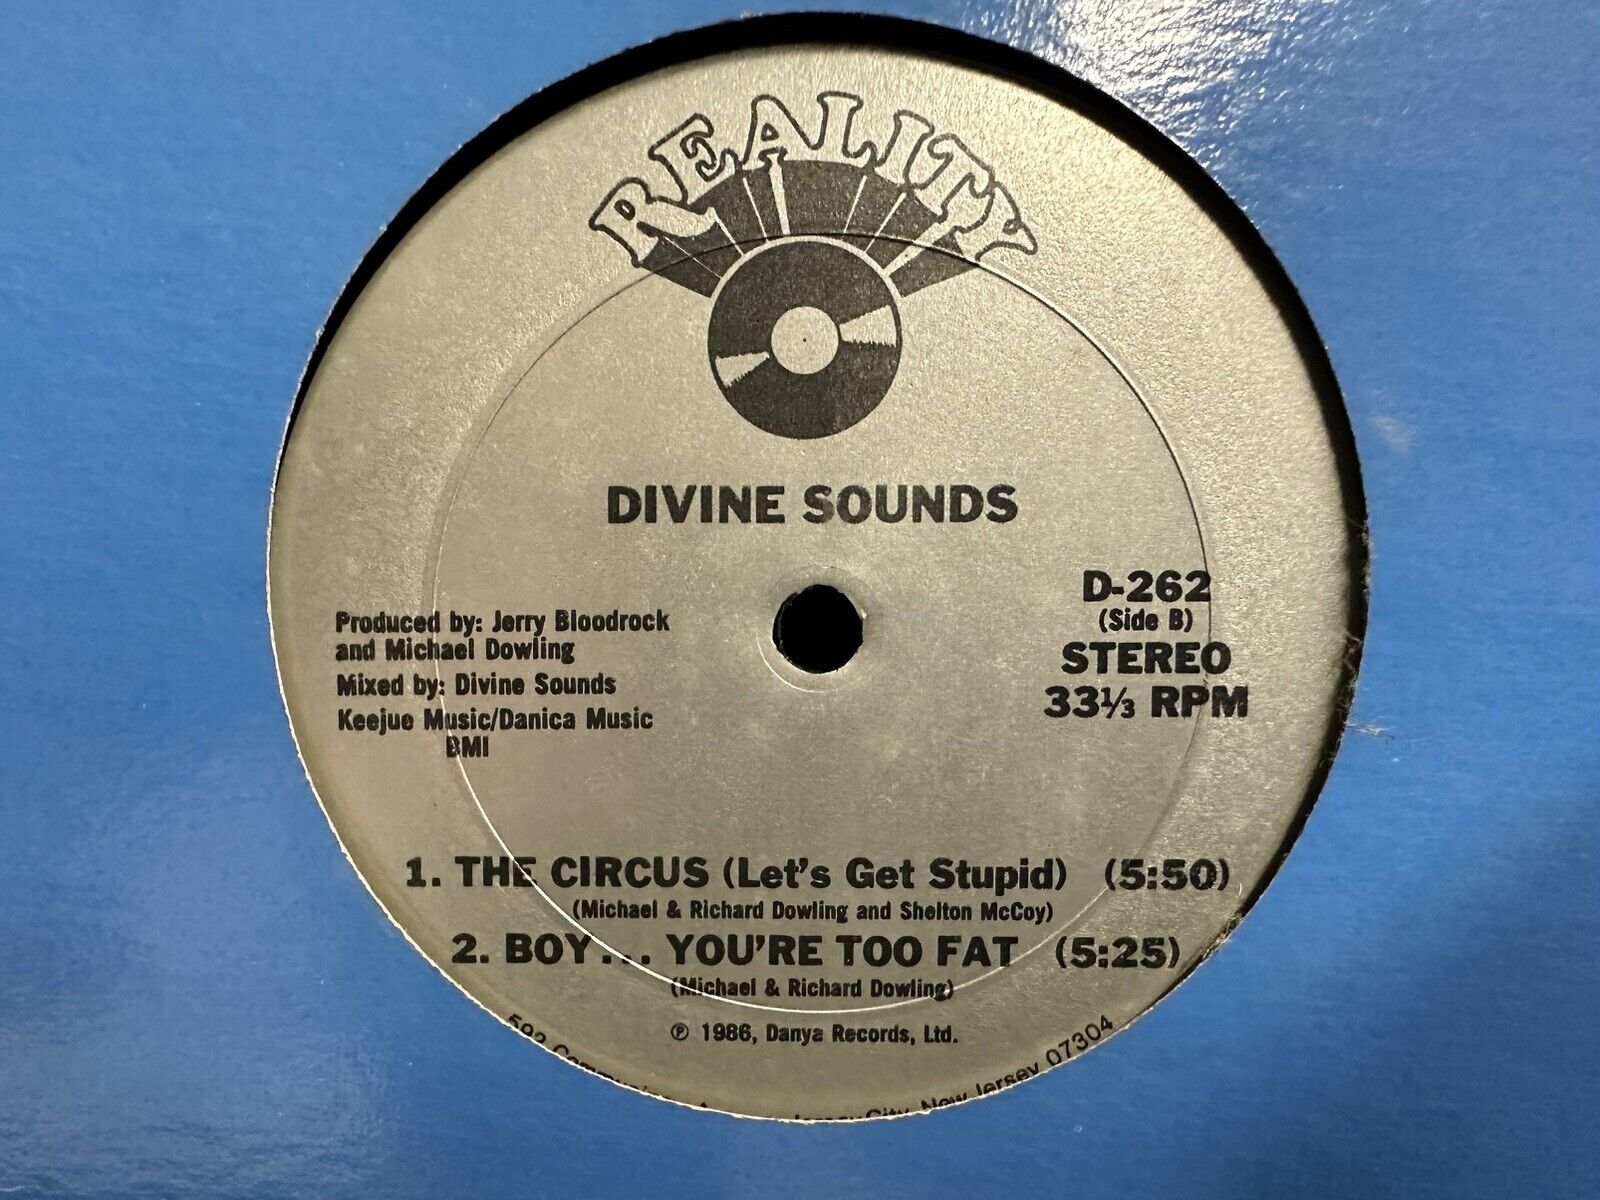 DIVINE SOUNDS "My Mother/The Circus/Boy You're Too Fat" 12" Hip Hop single 1986